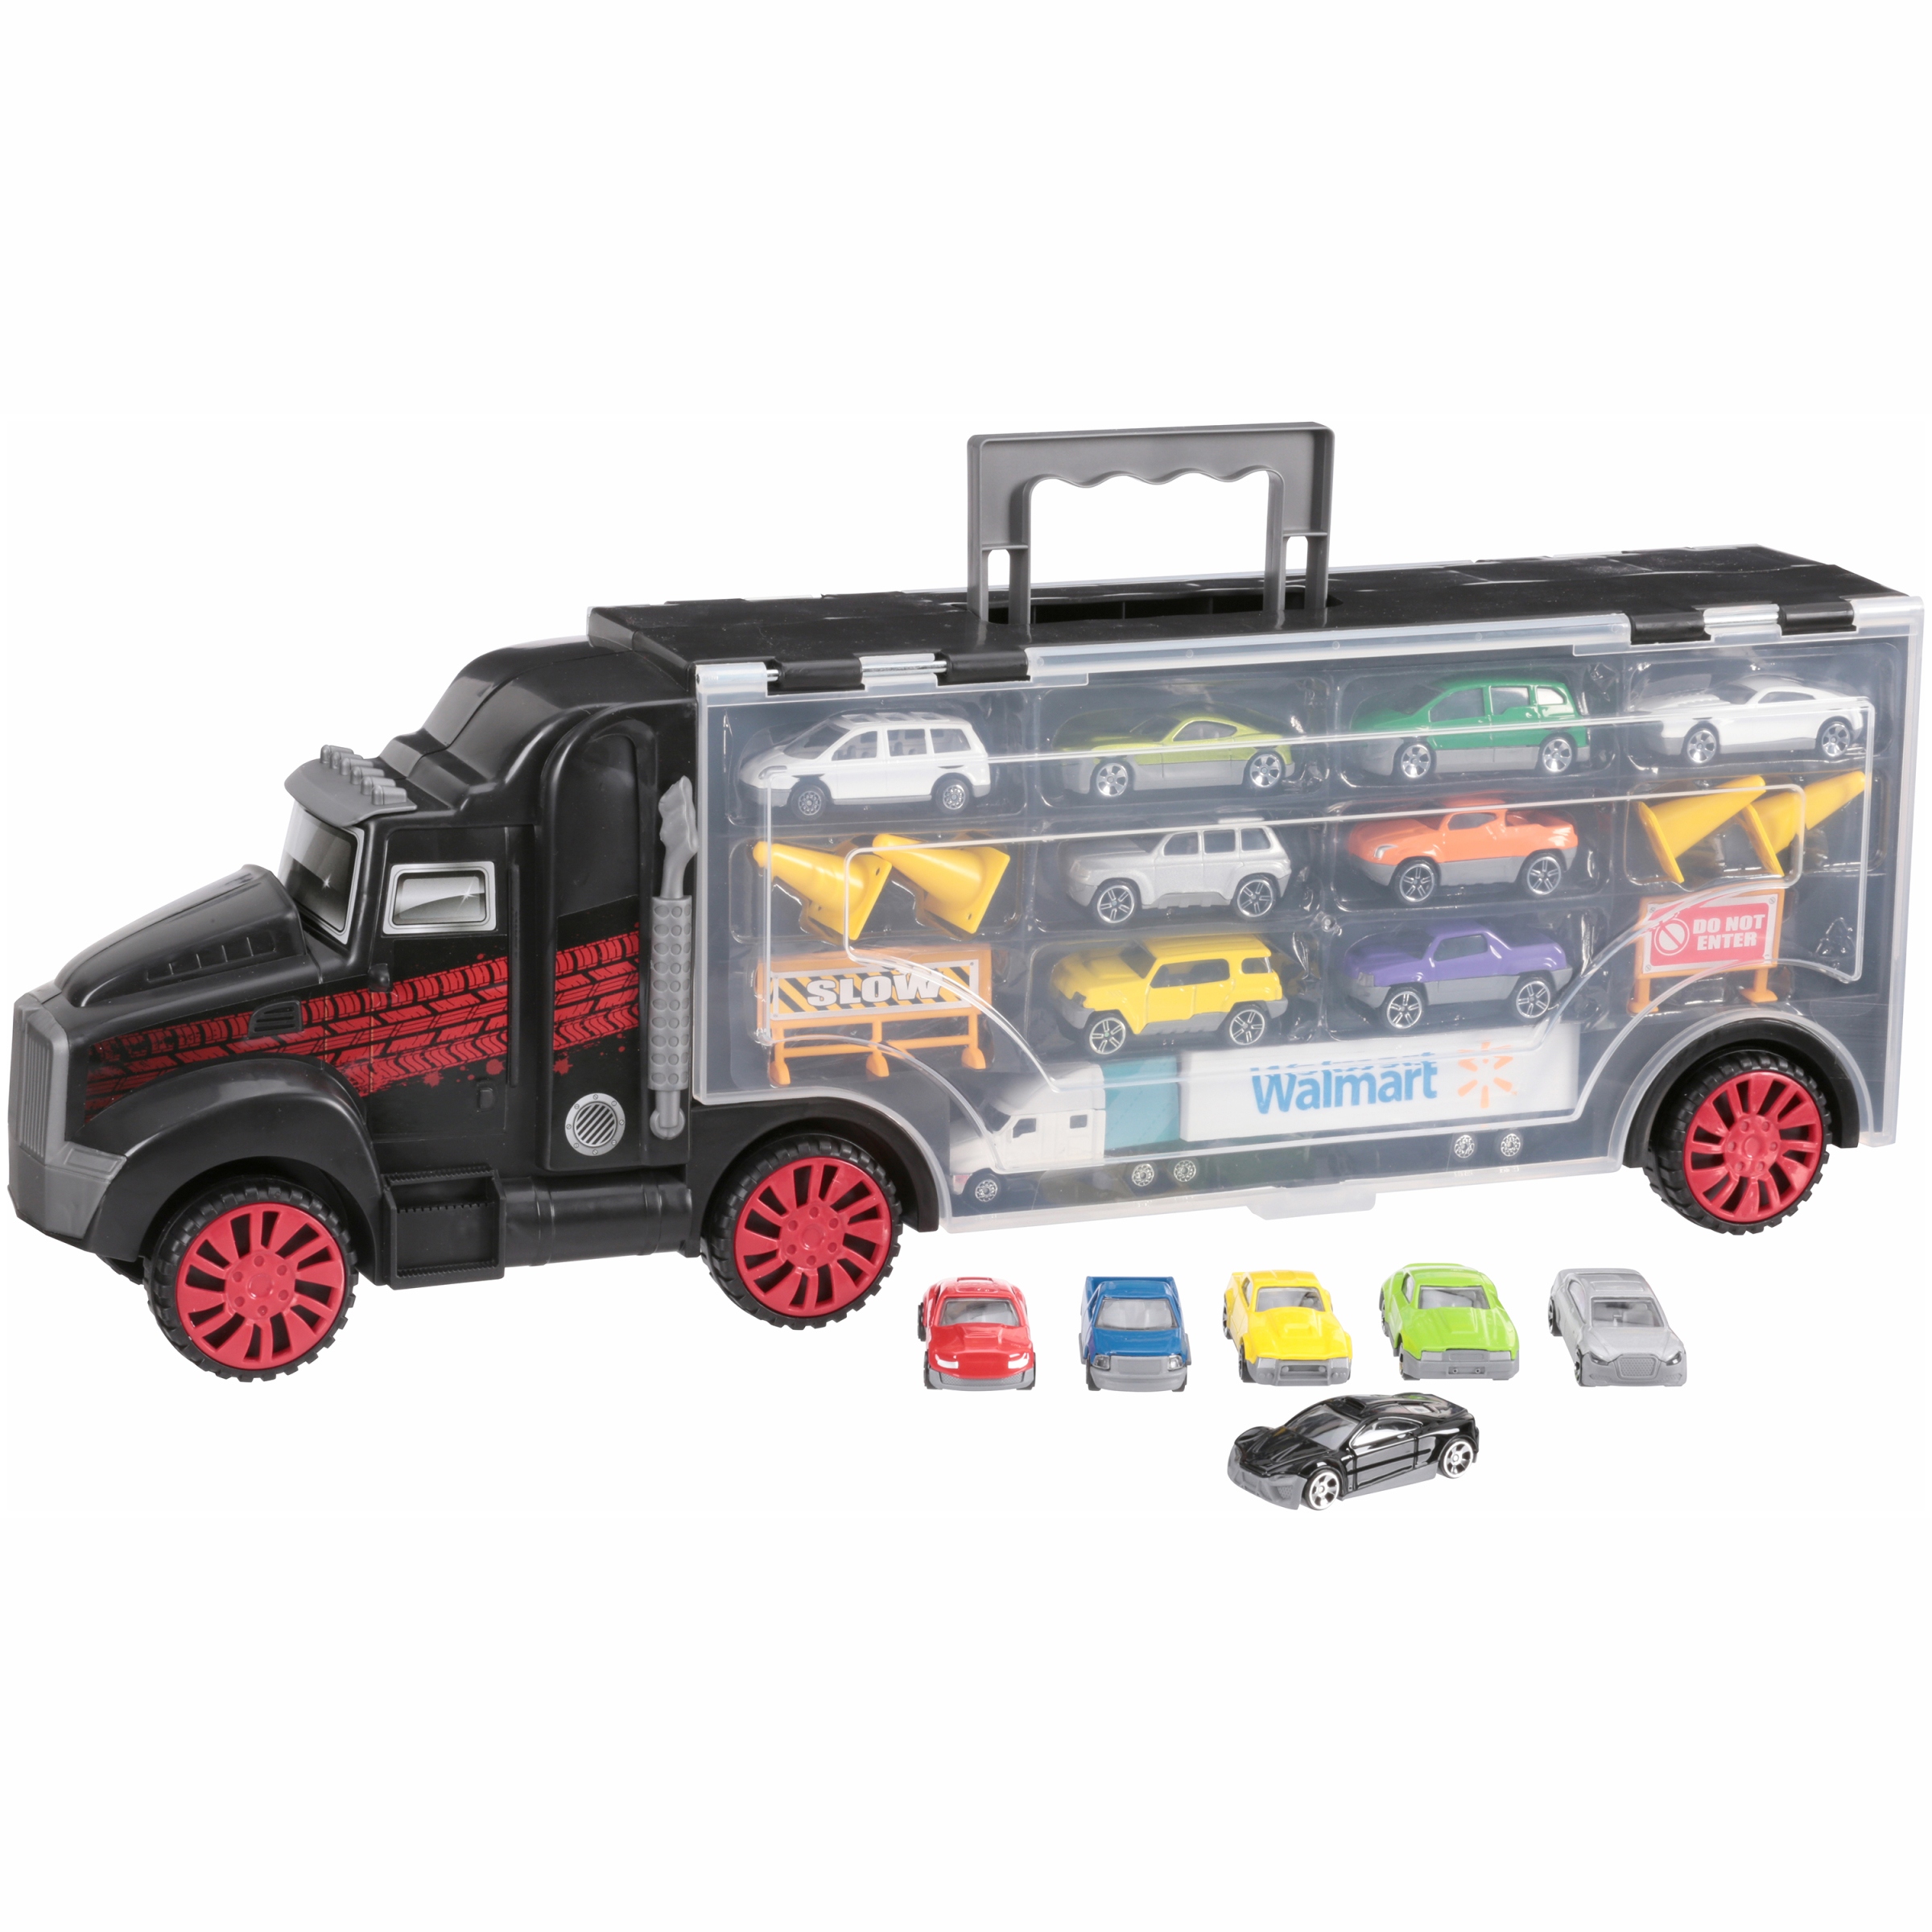 Kid Connection™ Big Rig Carrying Case 22 pc Box - image 1 of 4